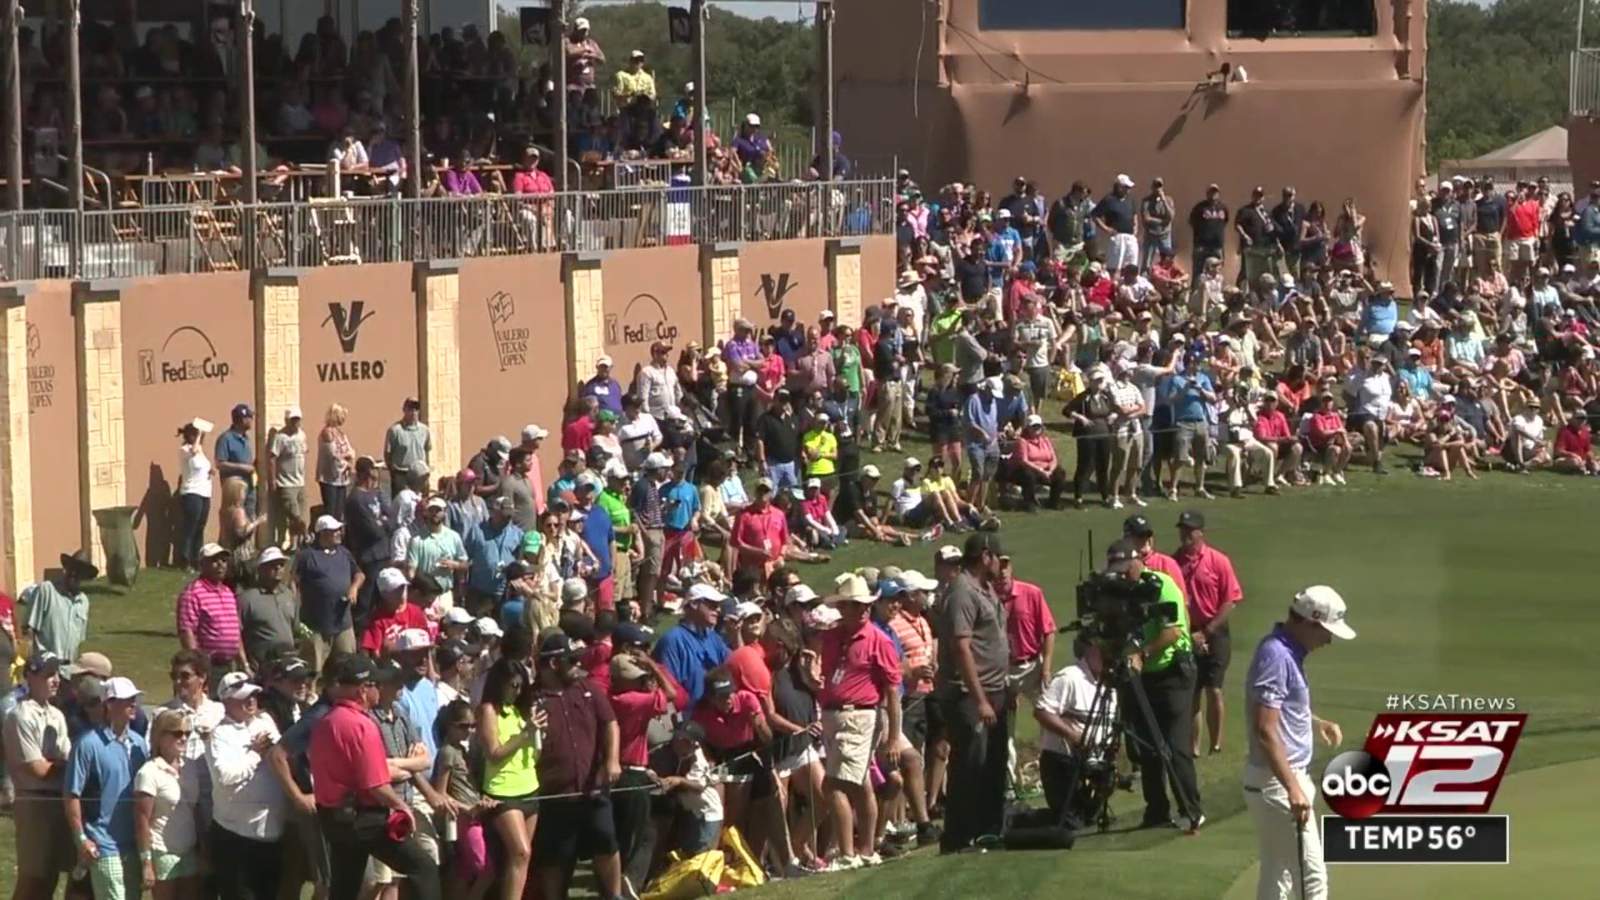 Valero Texas Open returning in 2021 with limited spectators